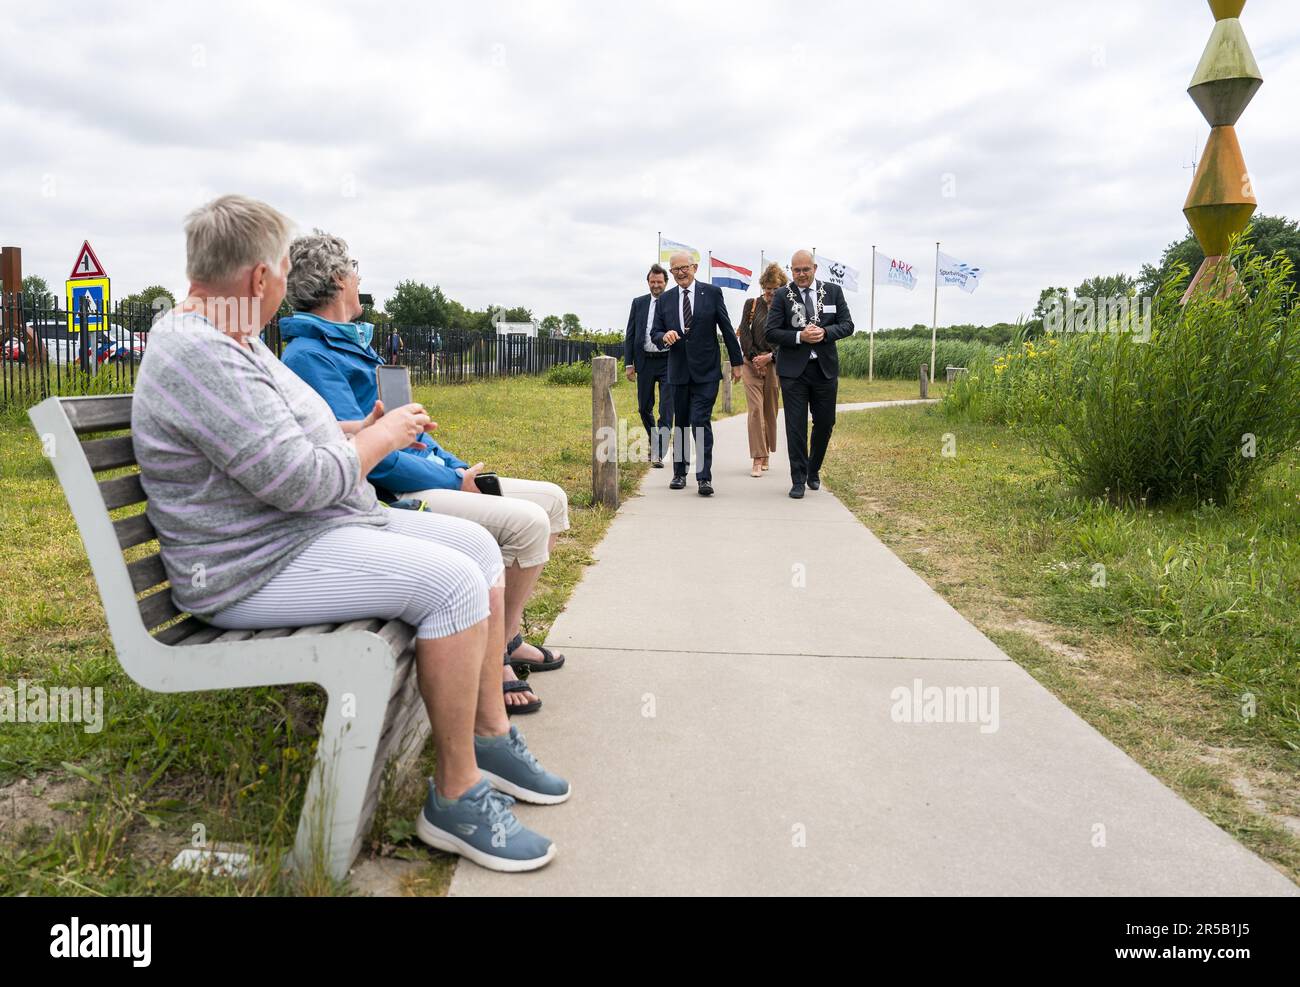 WORKENDAM - Prof. dr. mr. Pieter van Vollenhoven is received at the Biesbosch MuseumEiland. Van Vollenhoven is present at the release of a group of sturgeons in the water of National Park De Biesbosch. ANP JEROEN JUMELET netherlands out - belgium out Stock Photo